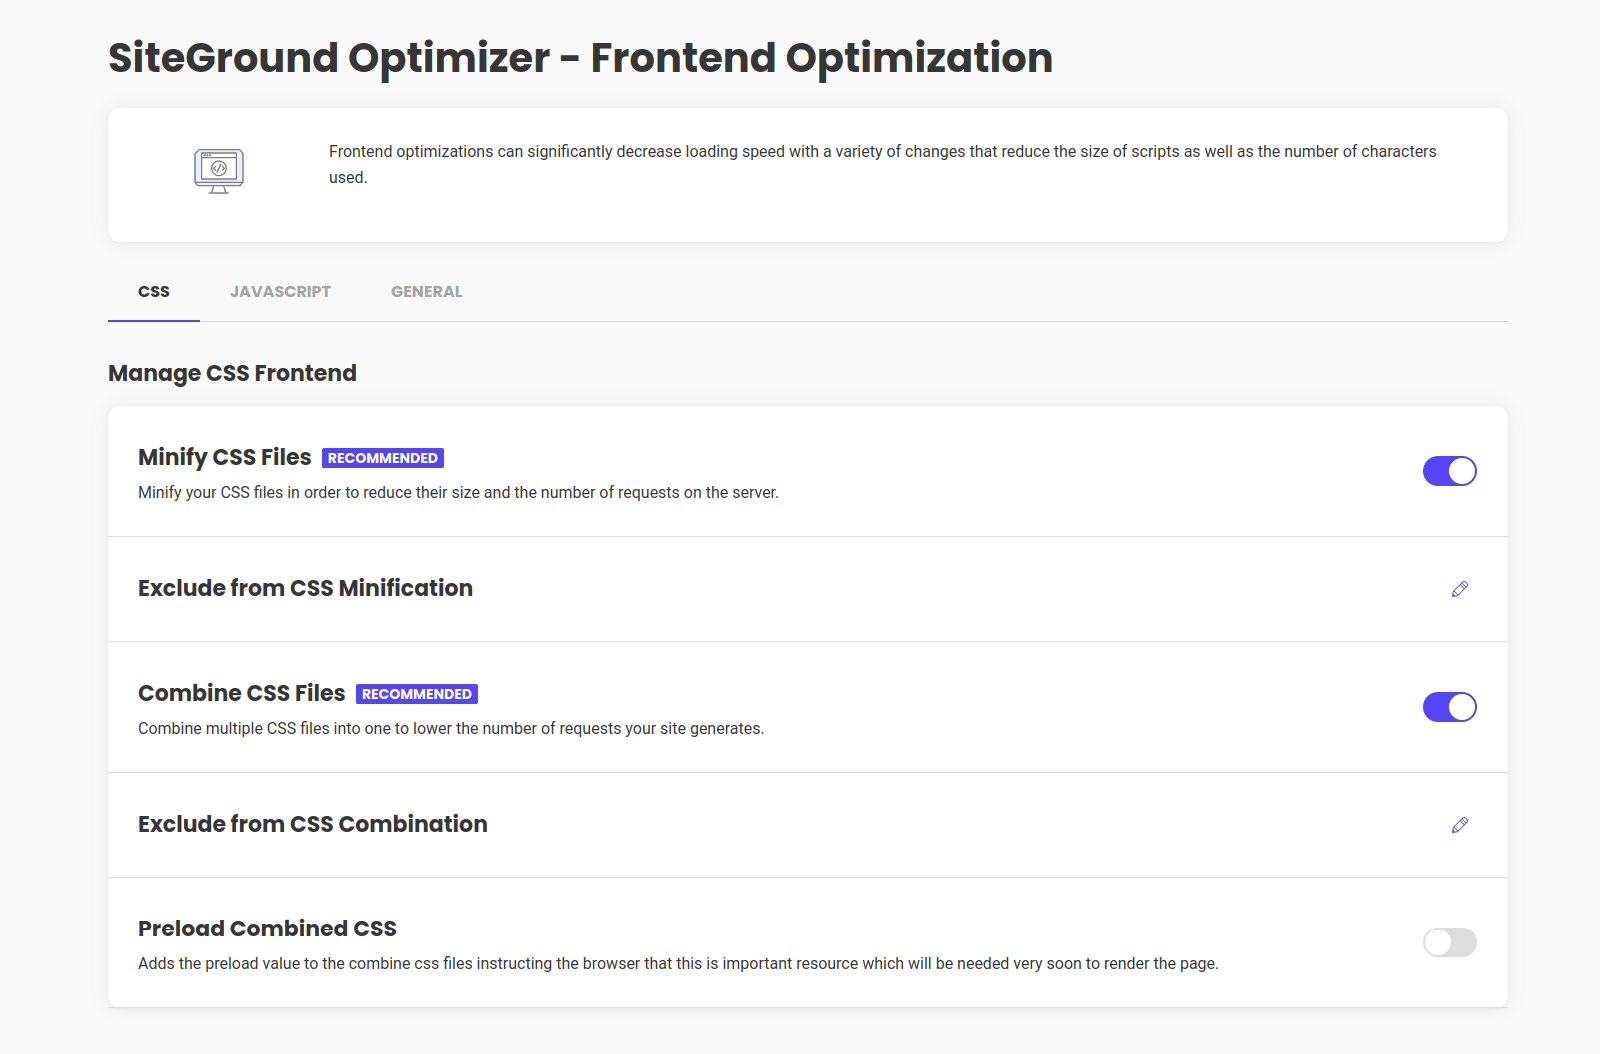 The SiteGround Optimizer Frontend Optimization Page allows you to Minify HTML, CSS & JS, as well as to remove query strings from your static resources and disable the Emoji support.